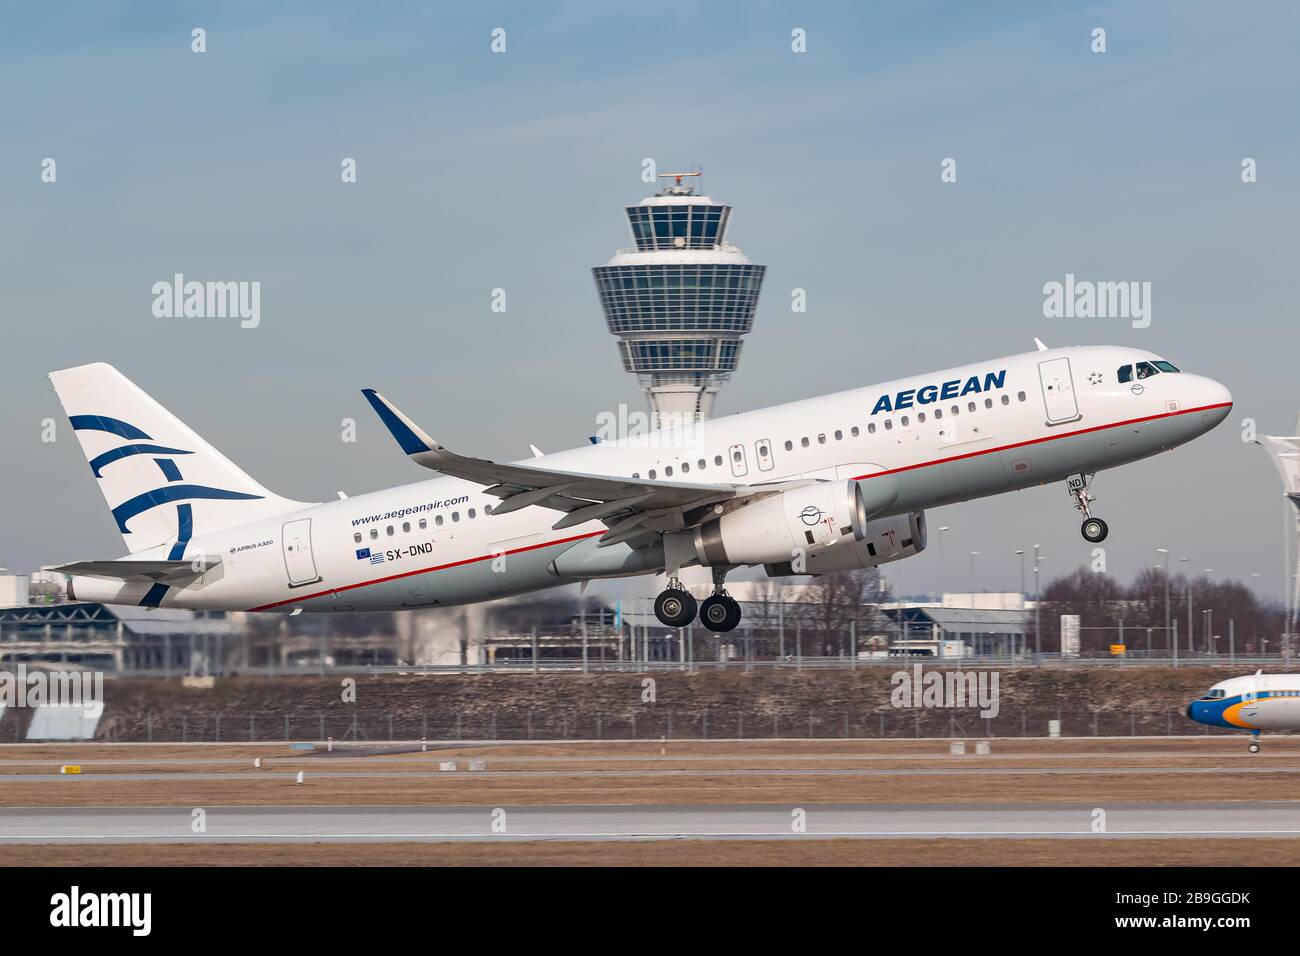 Munich, Germany - February 15, 2020: Aegean Airlines Airbus A320 Neo airplane at Munich airport (MUC) in Germany. Airbus is an aircraft manufacturer f Stock Photo